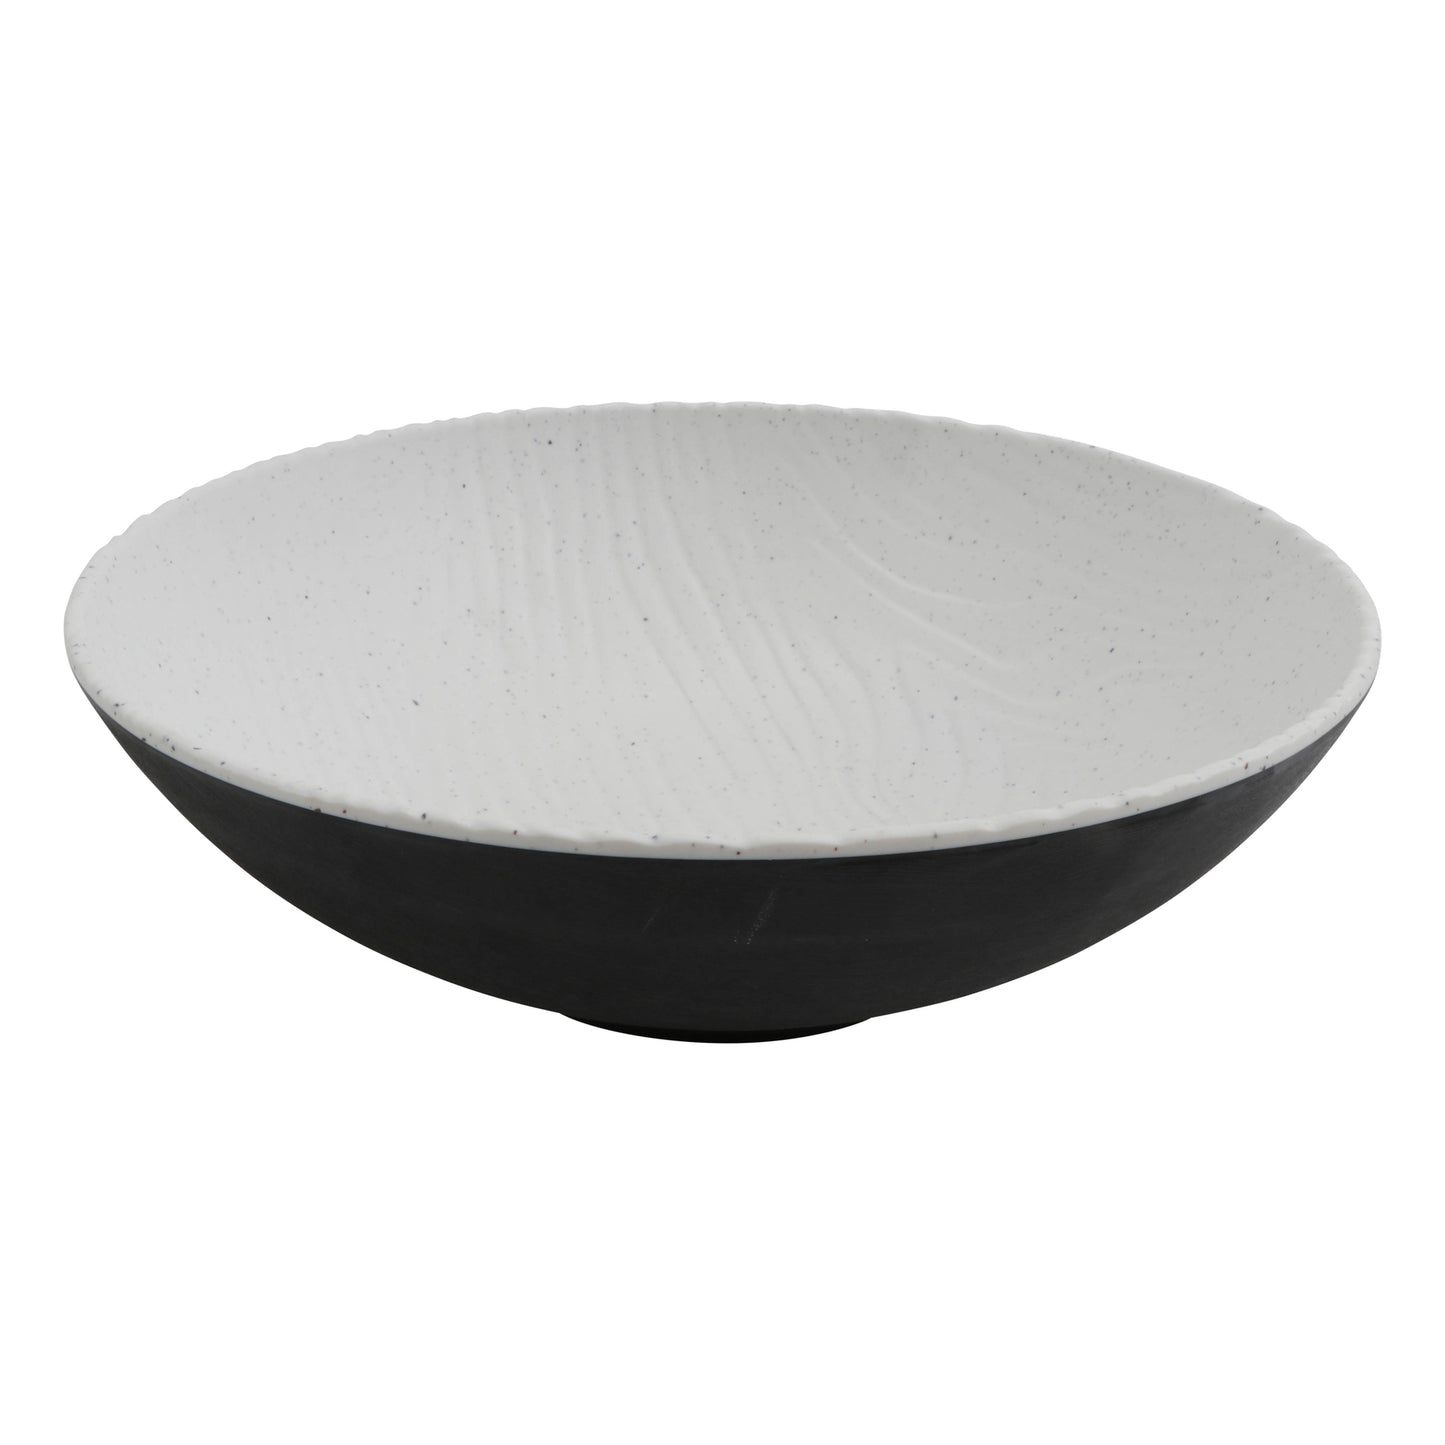 72 oz sustain stone natural with black exterior buffet melamine bowl (large), 10"L x 10"W x 3.75"H, GET, cheforward